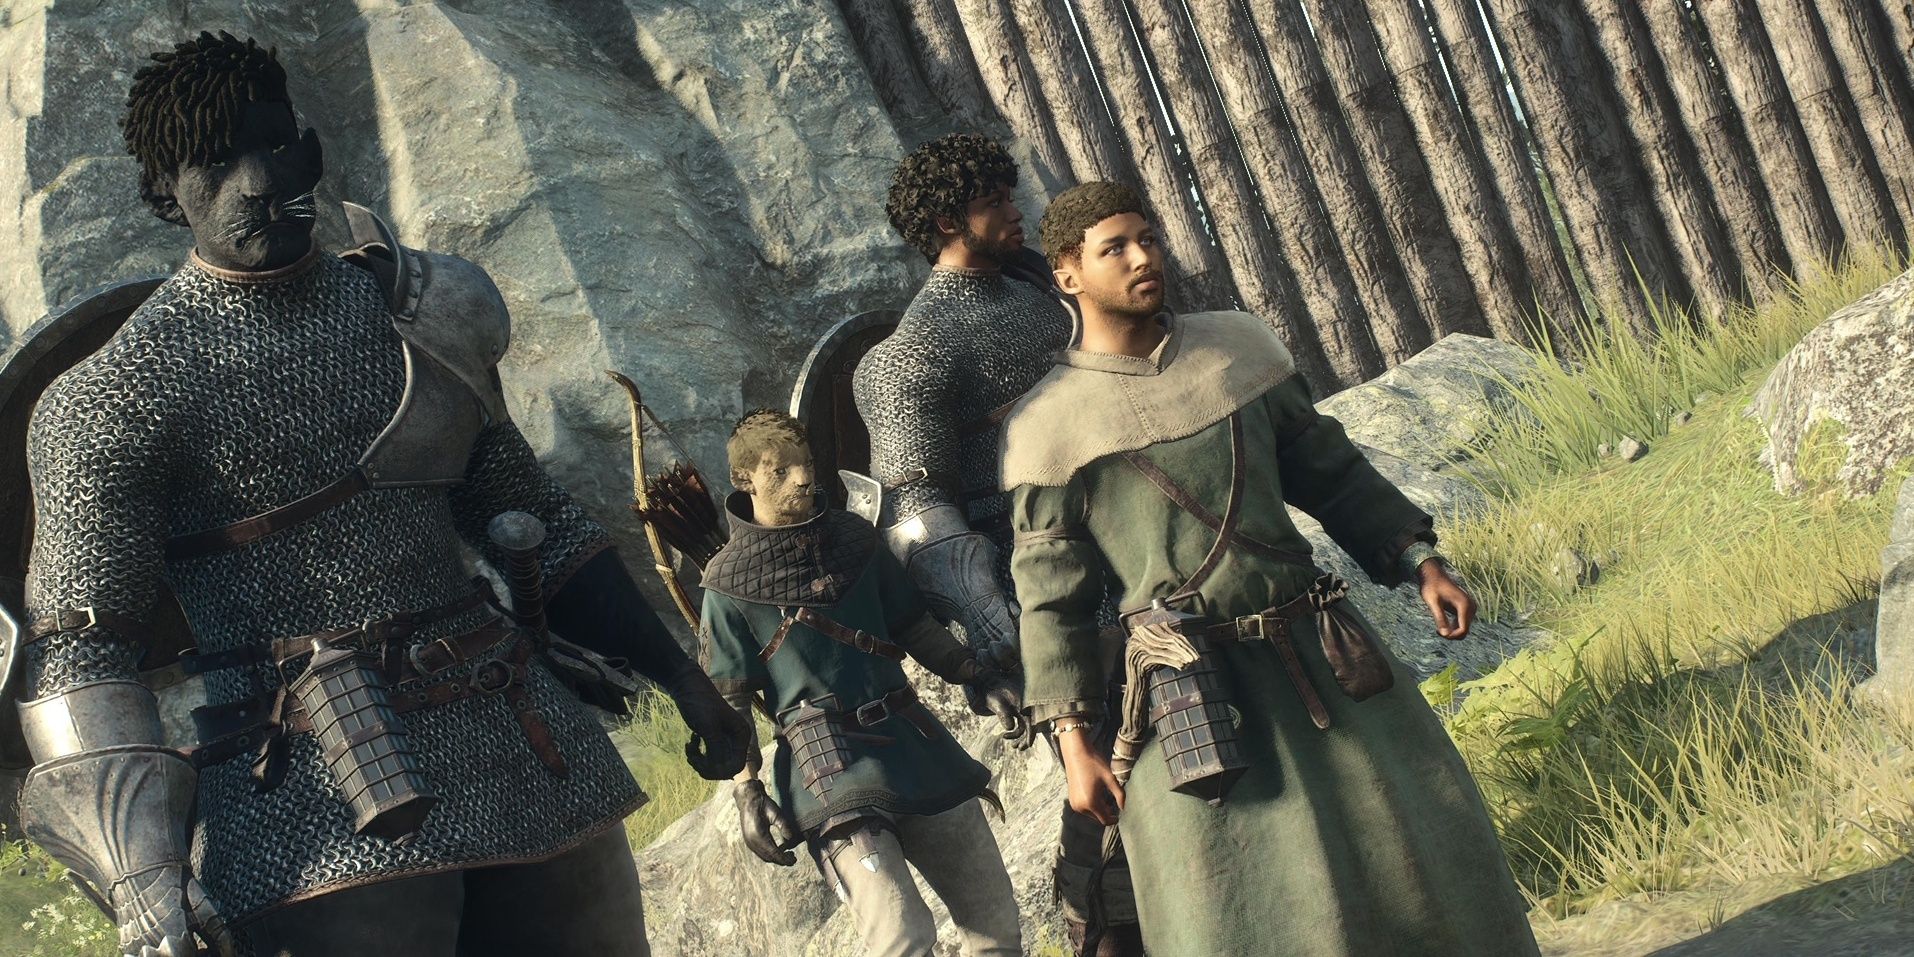 The Arisen and his Pawns journey in Dragon's Dogma 2